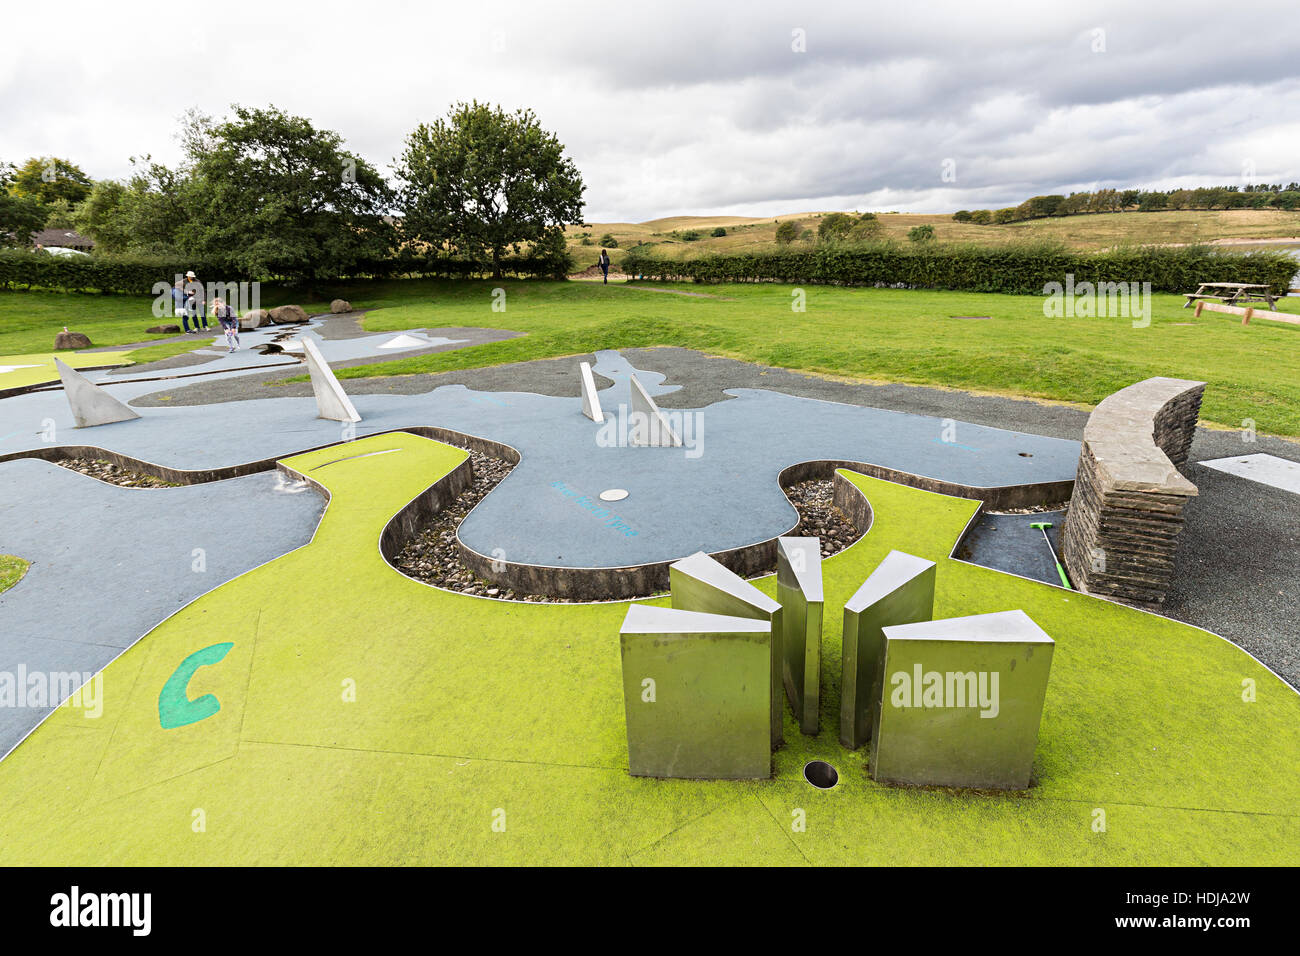 Crazy golf course with local landmarks represented for each hole, Kielder reservoir, Northumberland, England, UK Stock Photo